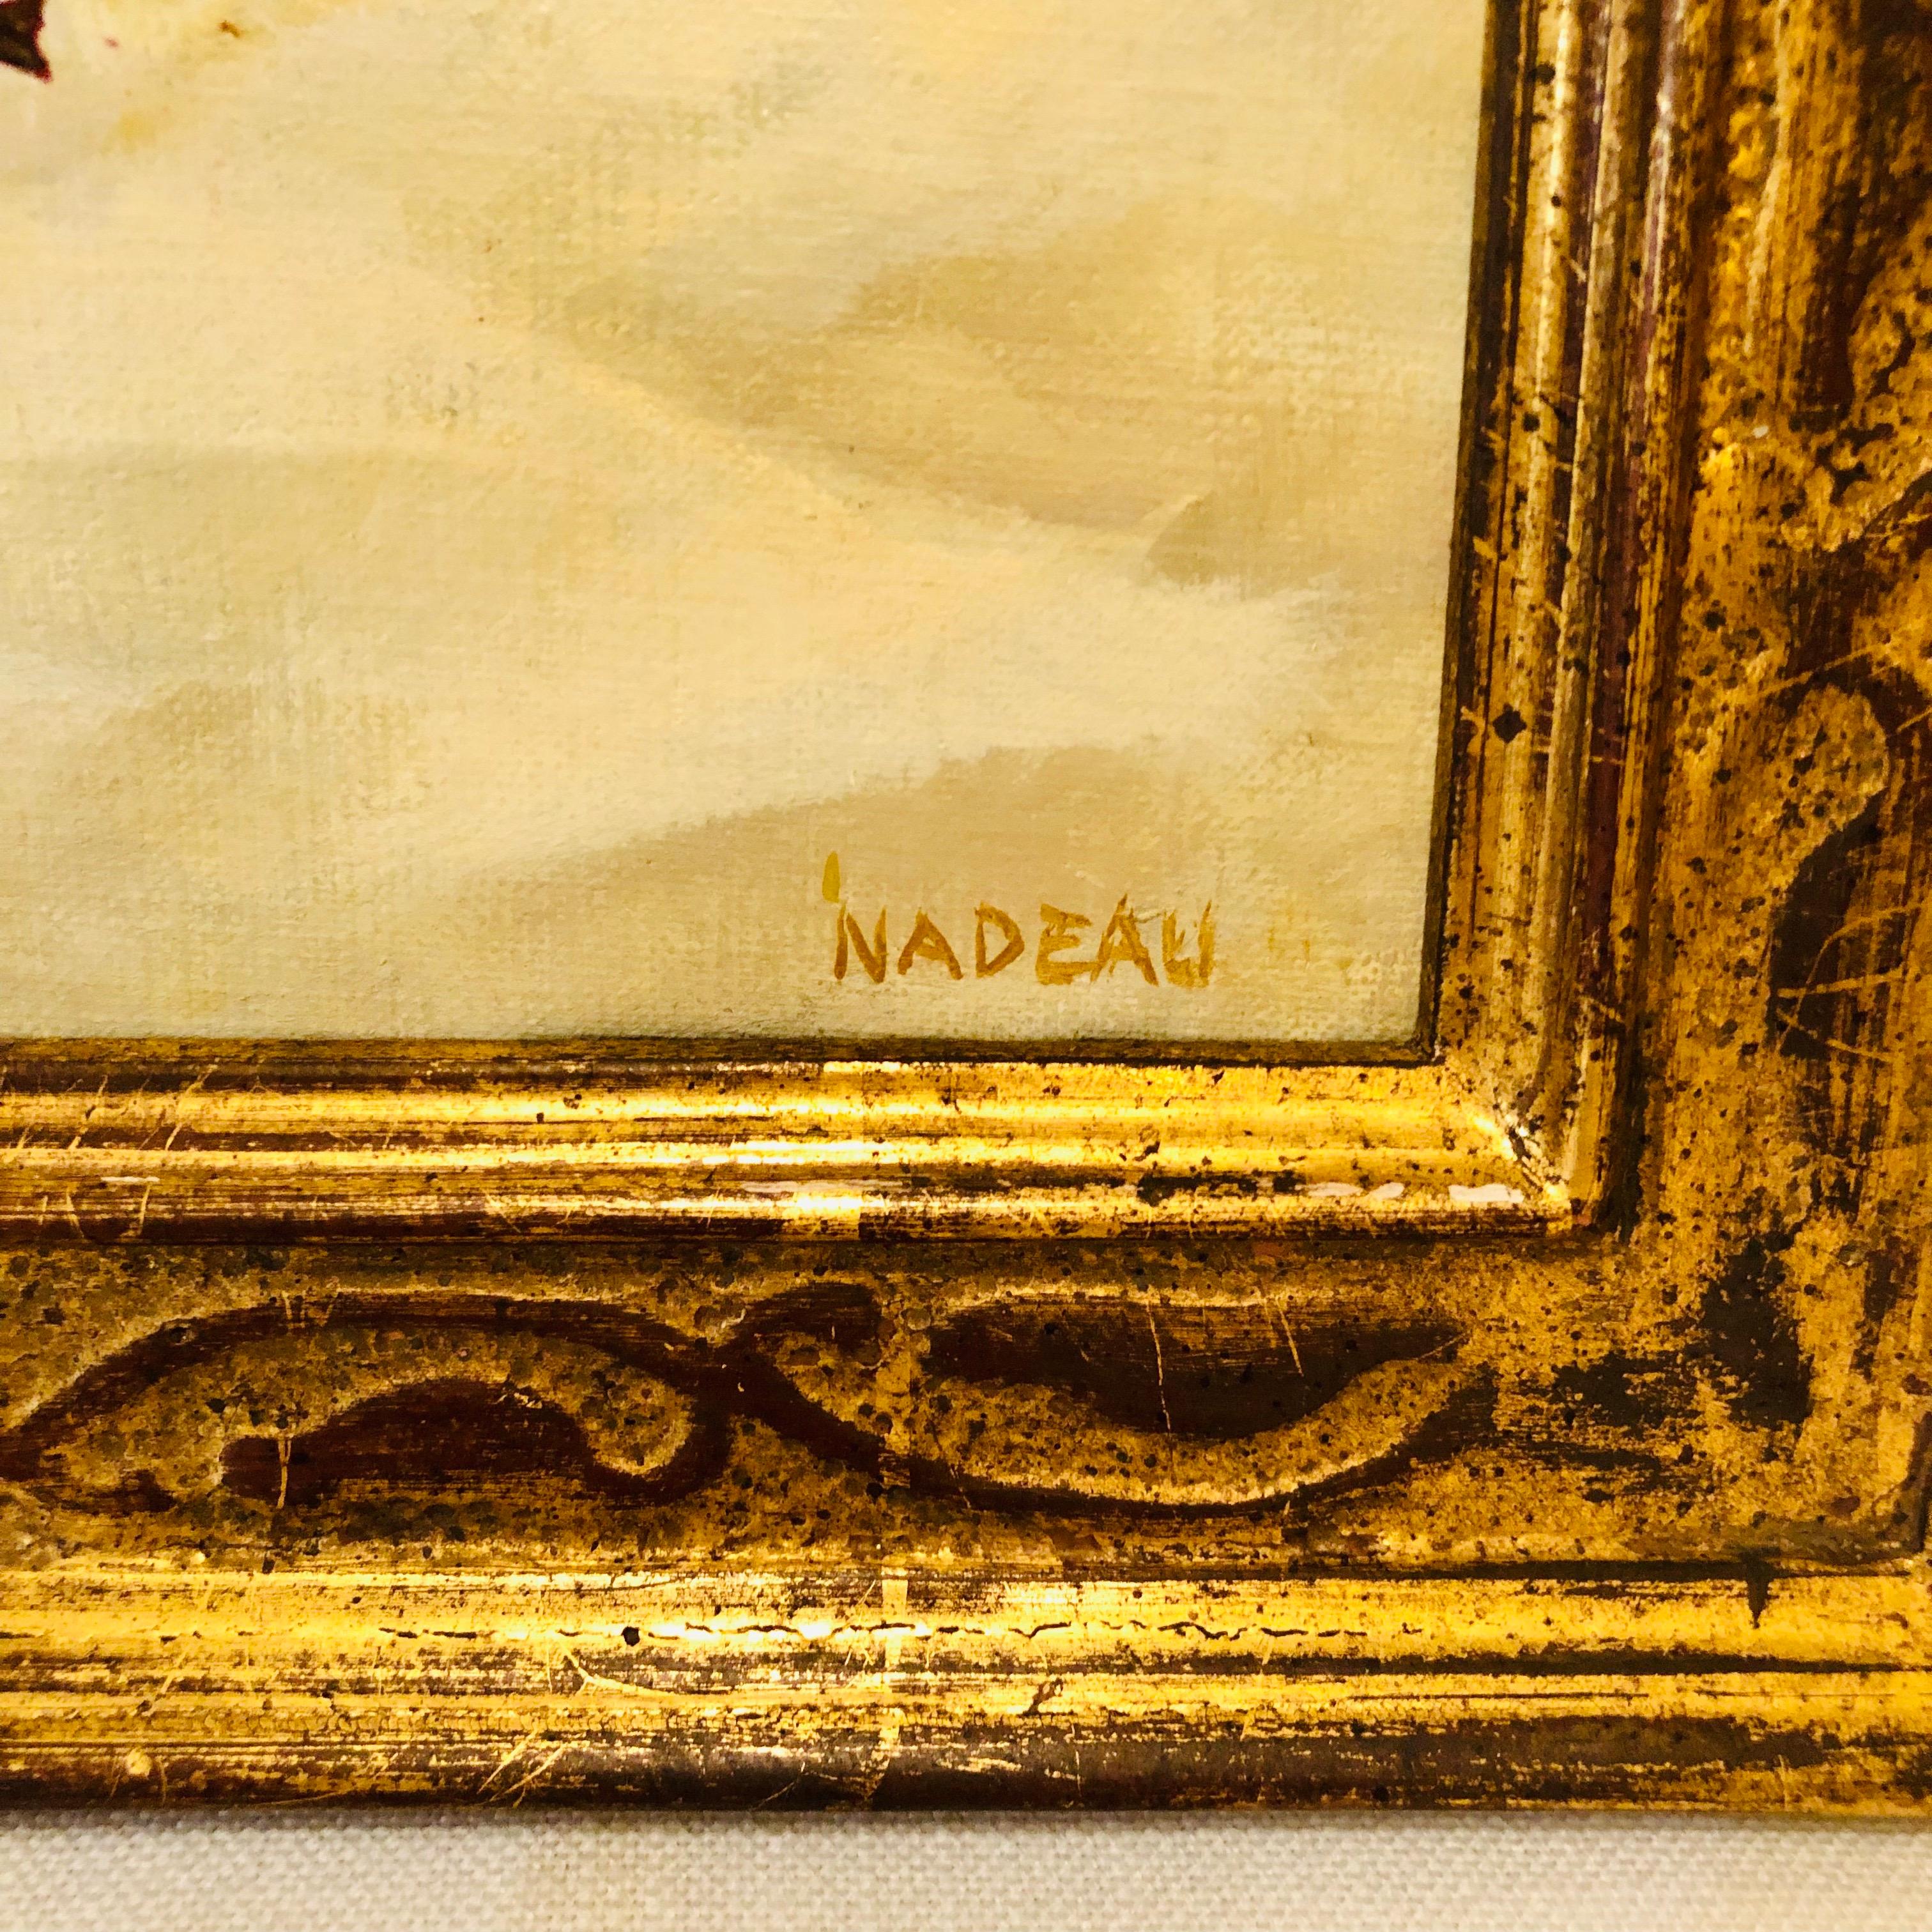 Oil on Canvas Painting of Pears and Other Fruits in a Gold Frame Signed Nadeau 8